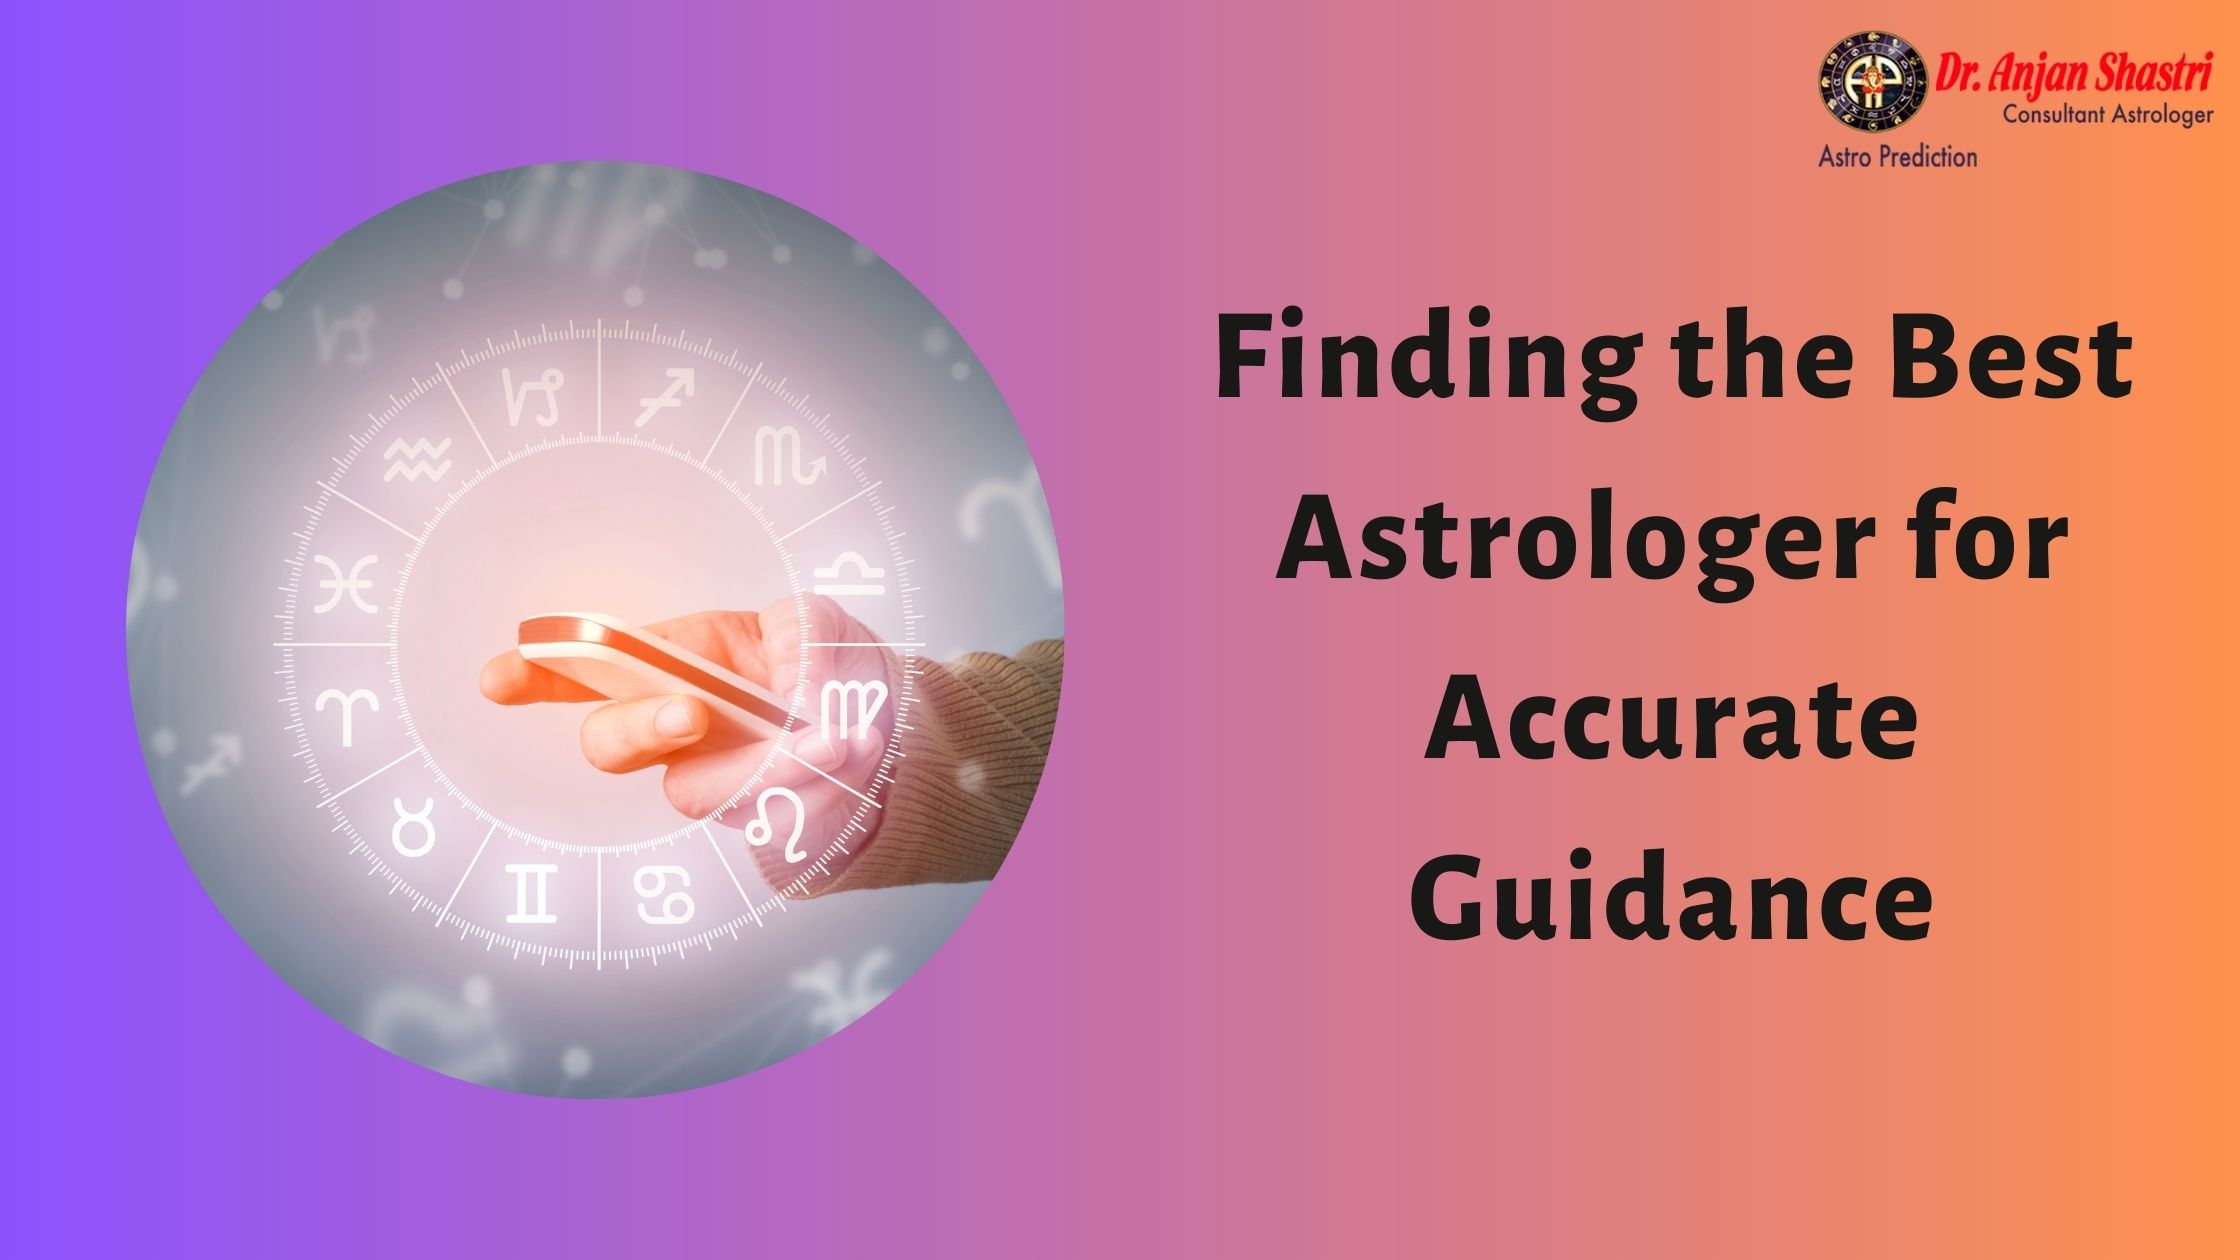 Finding the Best Astrologer for Accurate Guidance